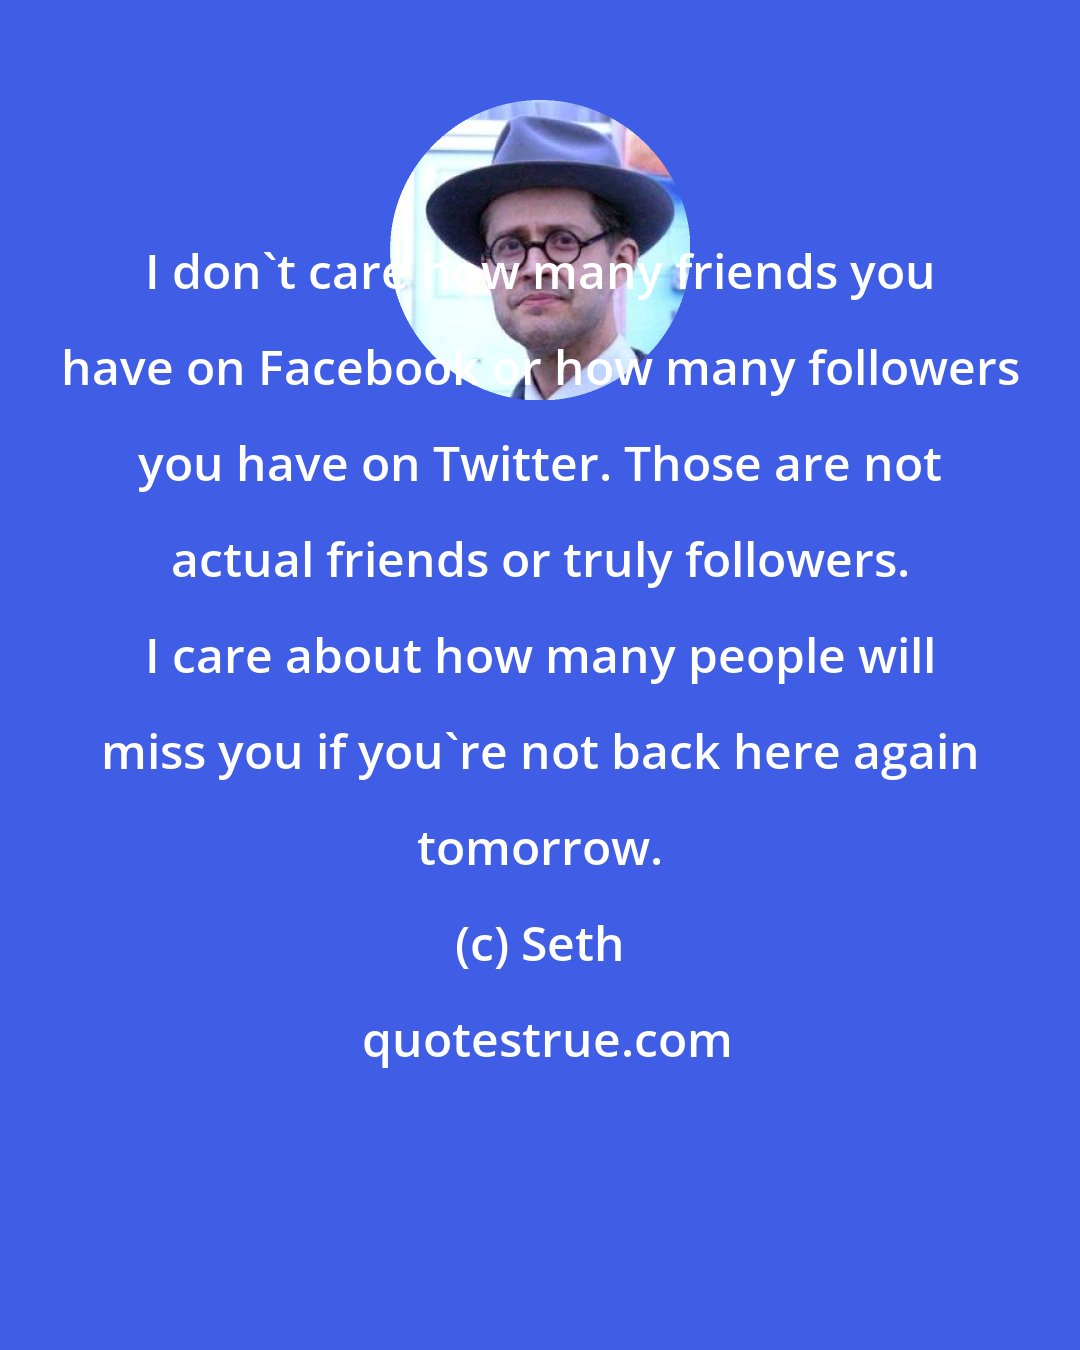 Seth: I don't care how many friends you have on Facebook or how many followers you have on Twitter. Those are not actual friends or truly followers. I care about how many people will miss you if you're not back here again tomorrow.